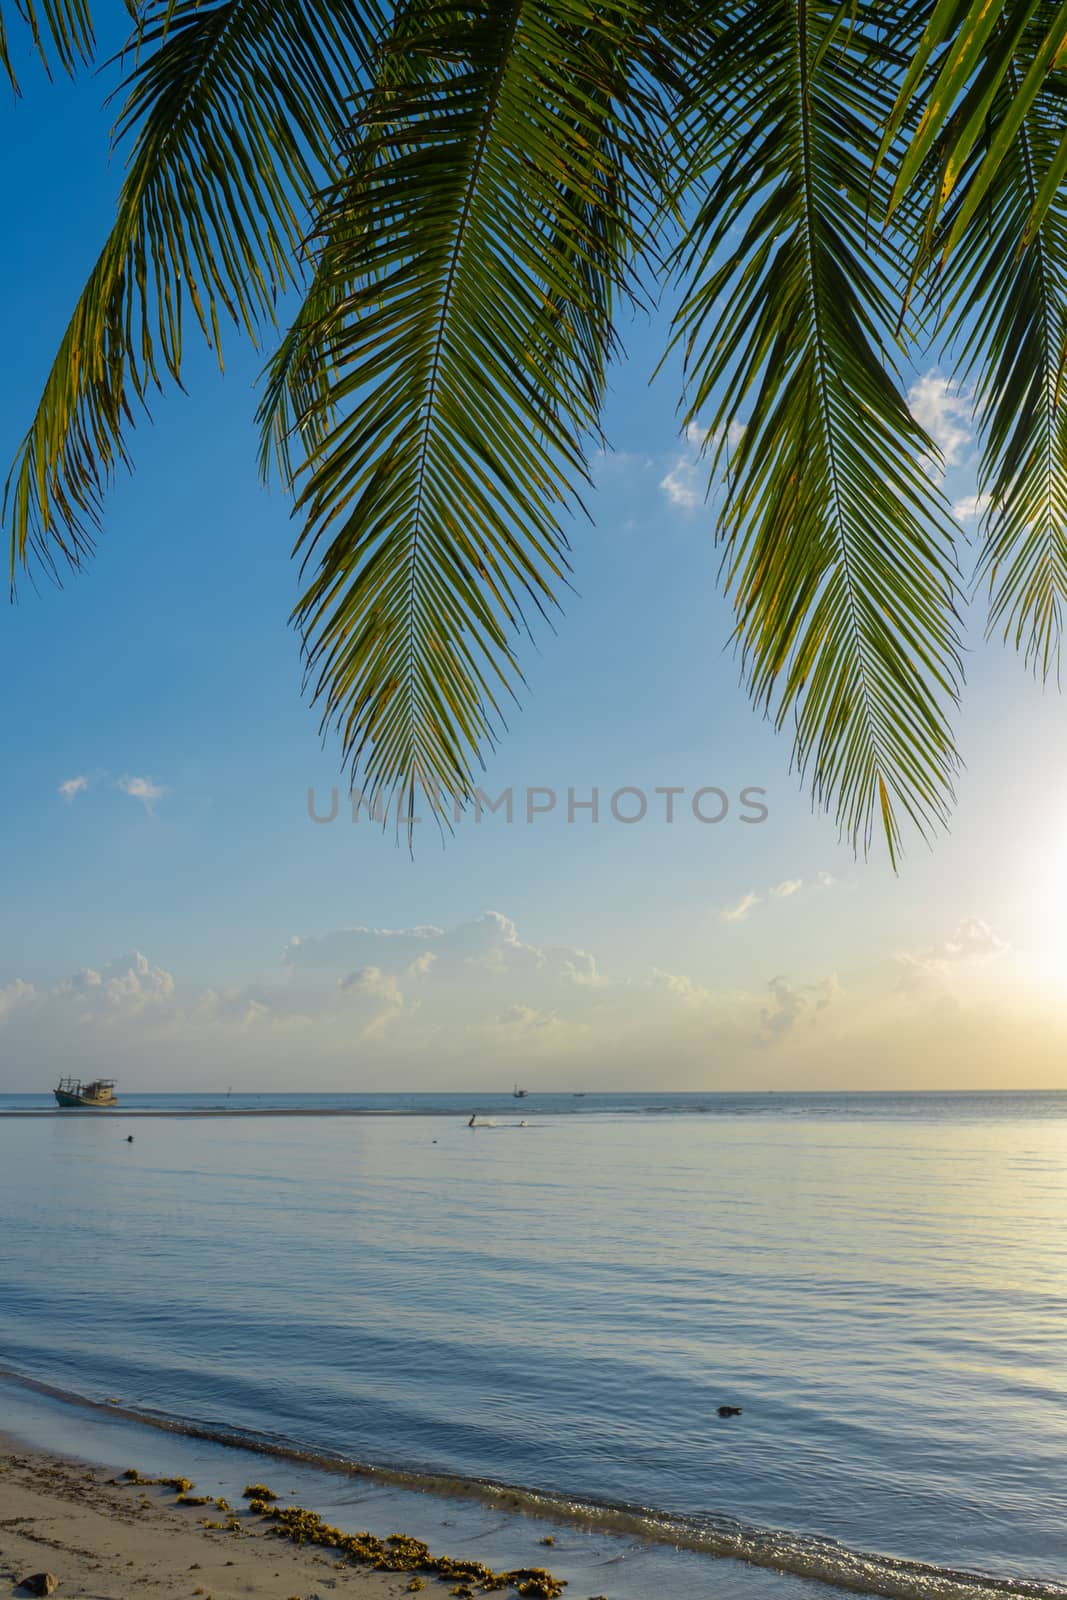 Sunset on a paradise tropical beach with palm trees